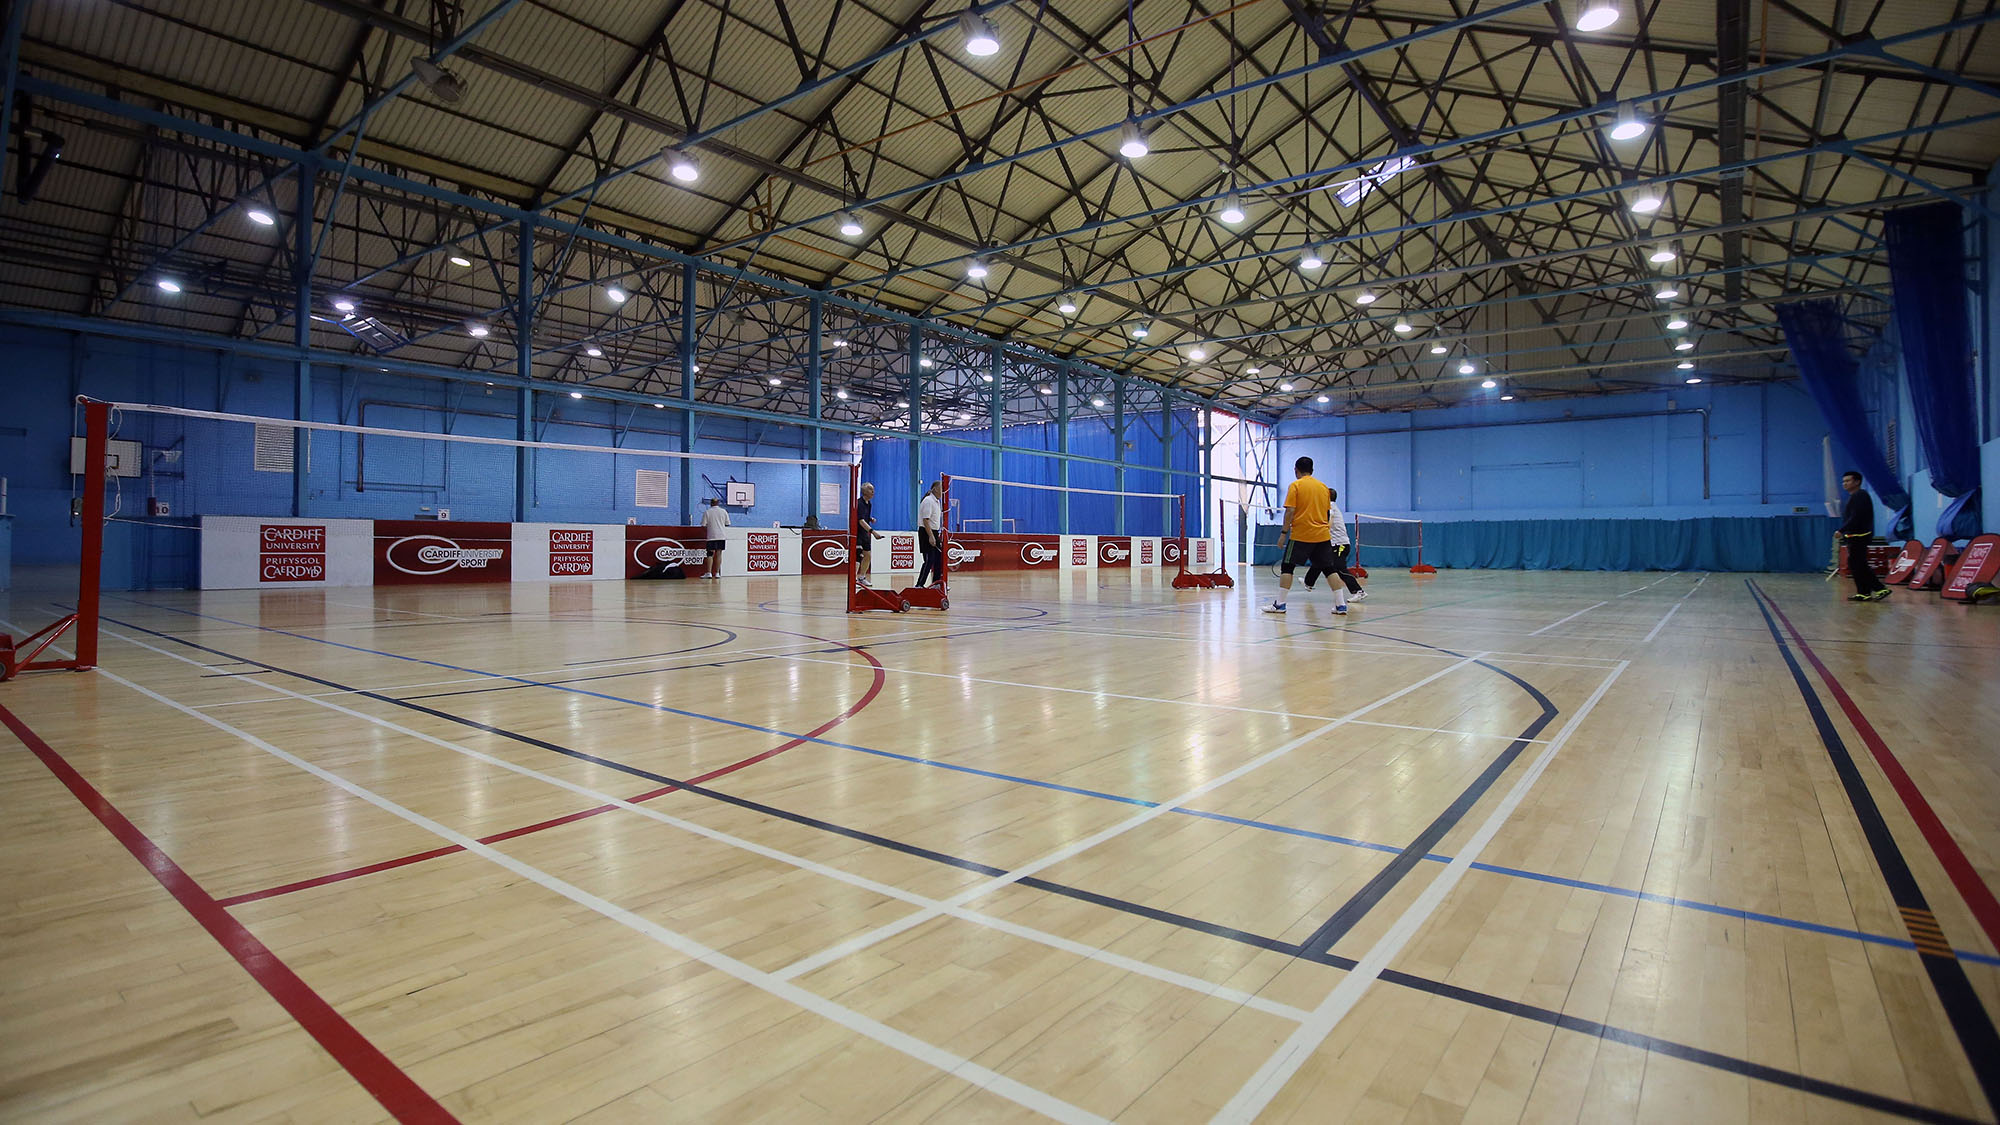 Master thesis sports facility survey